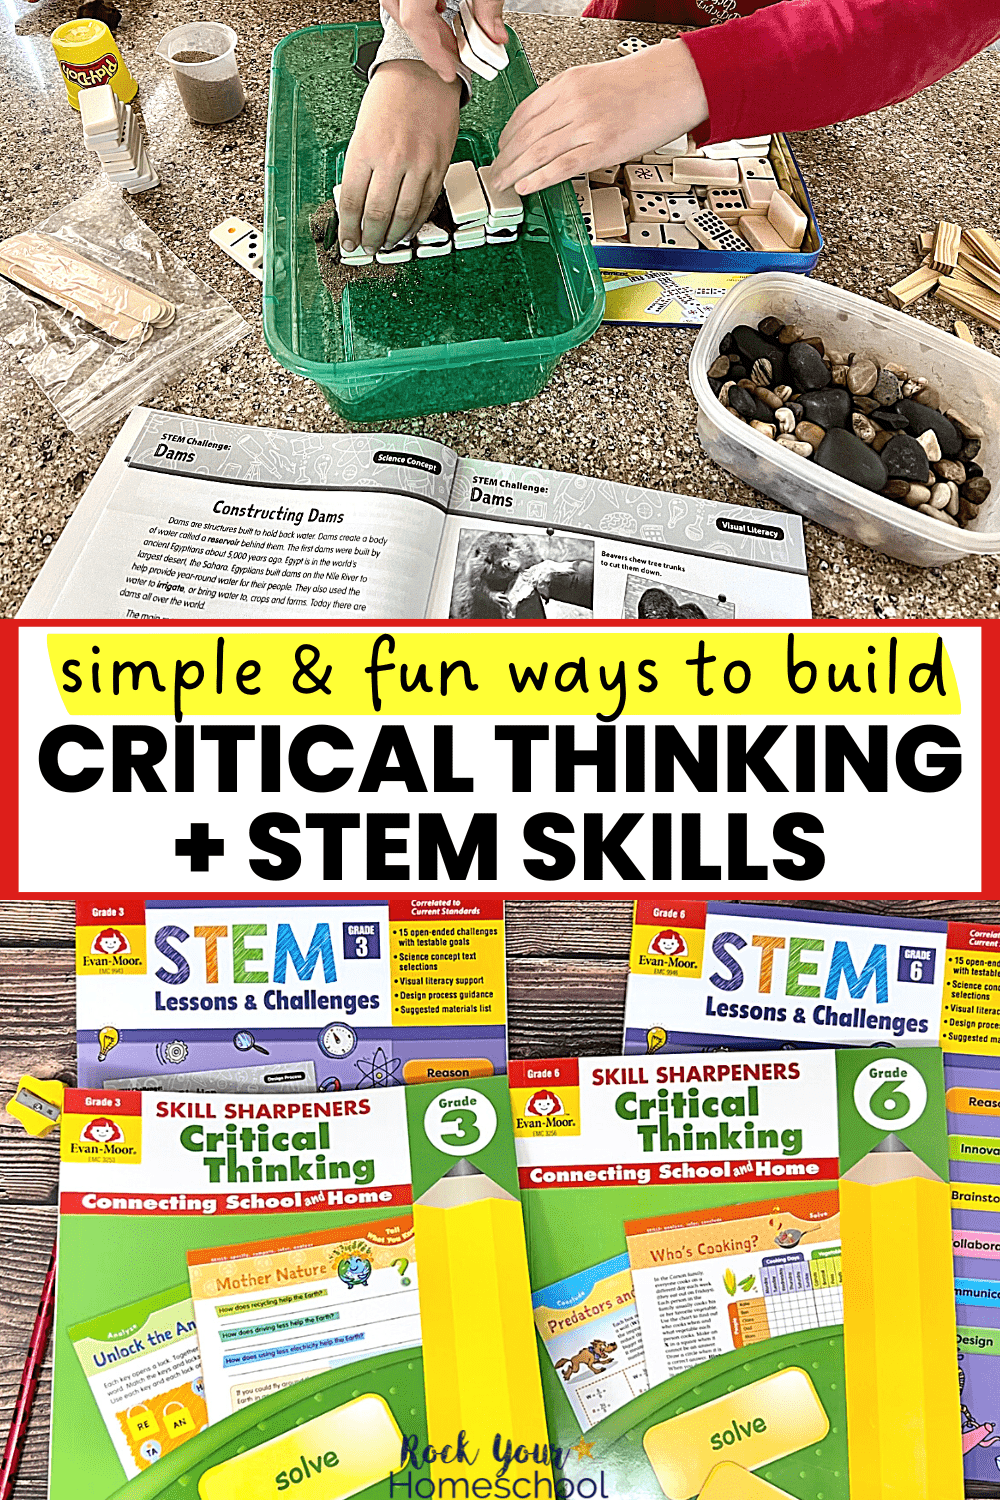 Skills Sharpeners for Critical Thinking & STEM Lessons: 2 Smart Resources for Your Homeschool